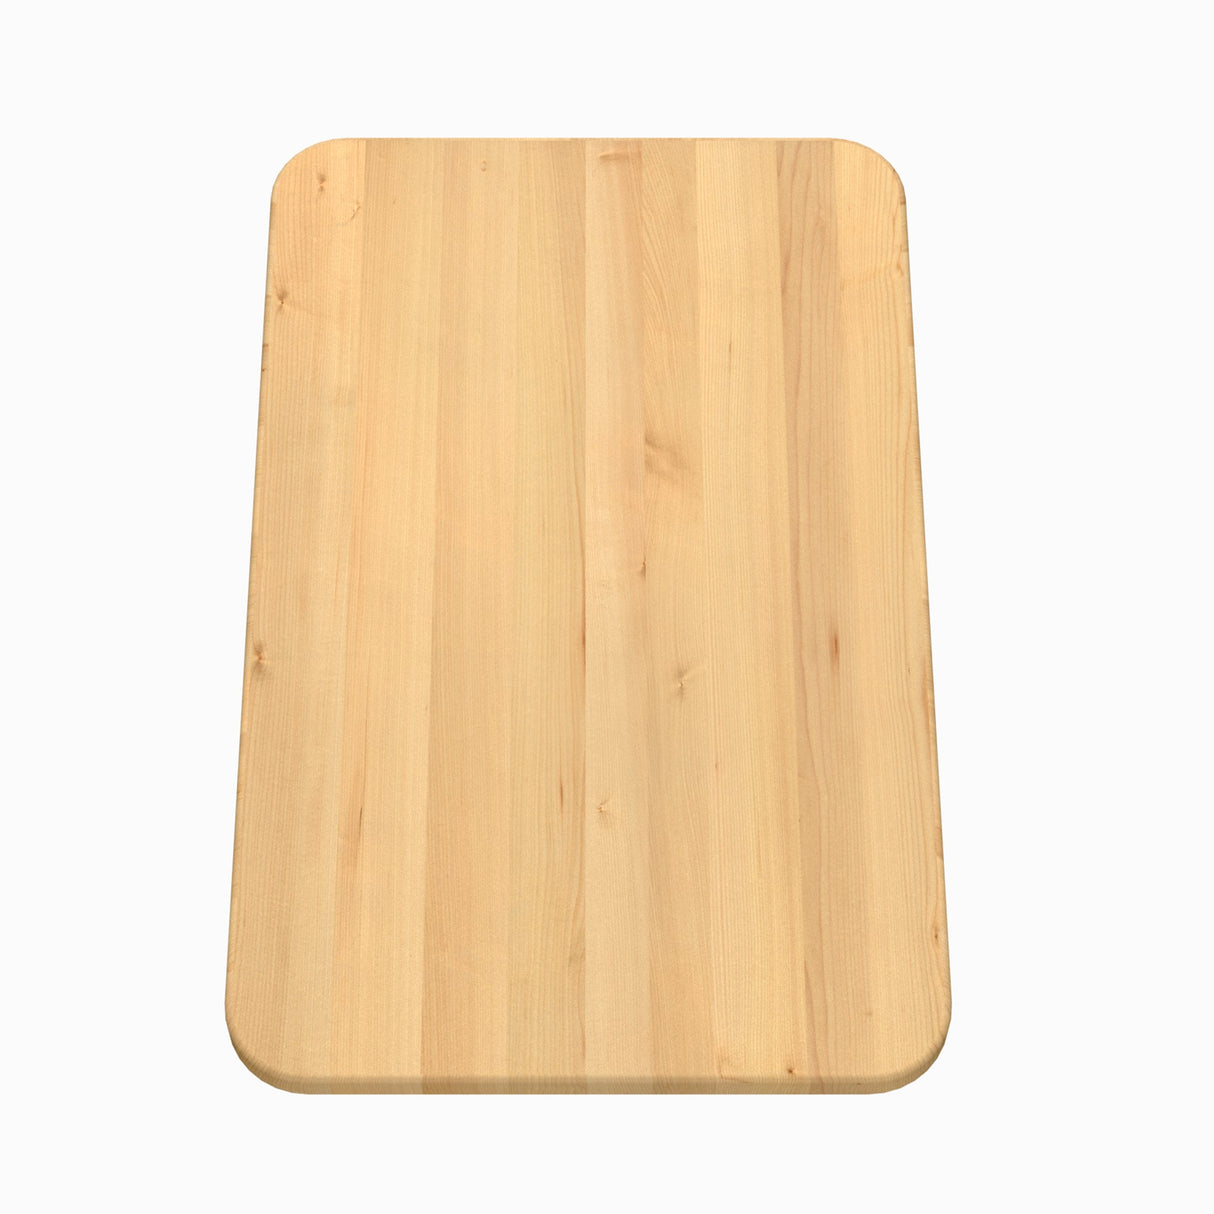 KINDRED MB517 Laminated Bamboo Cutting Board 17.5-in x 11-in